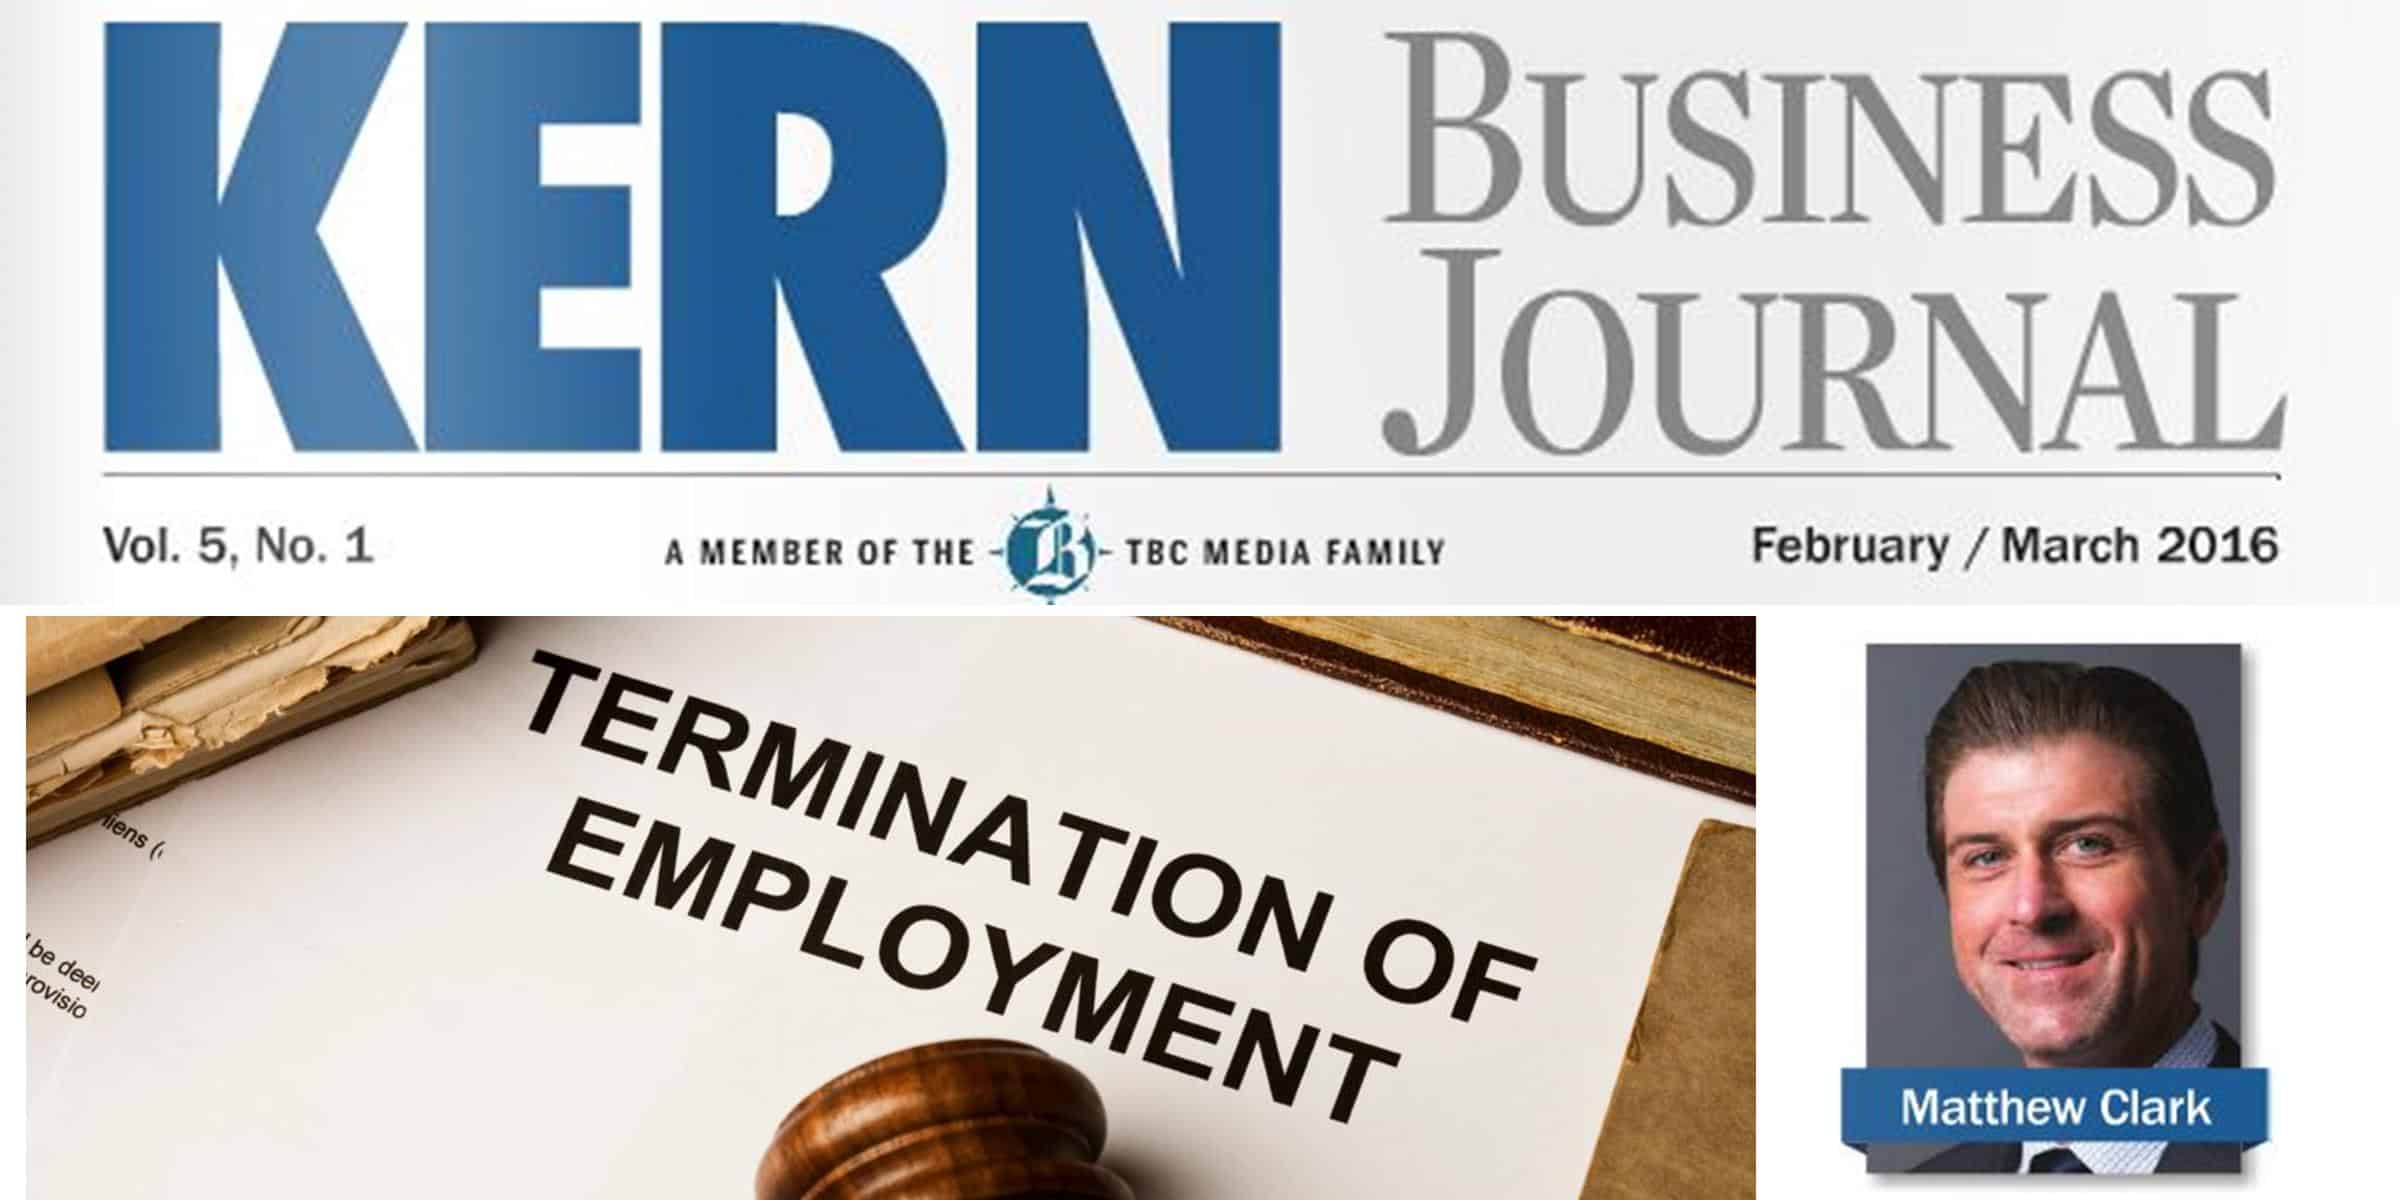 Employers: Avoid potential wrongful termination lawsuits by following these tips